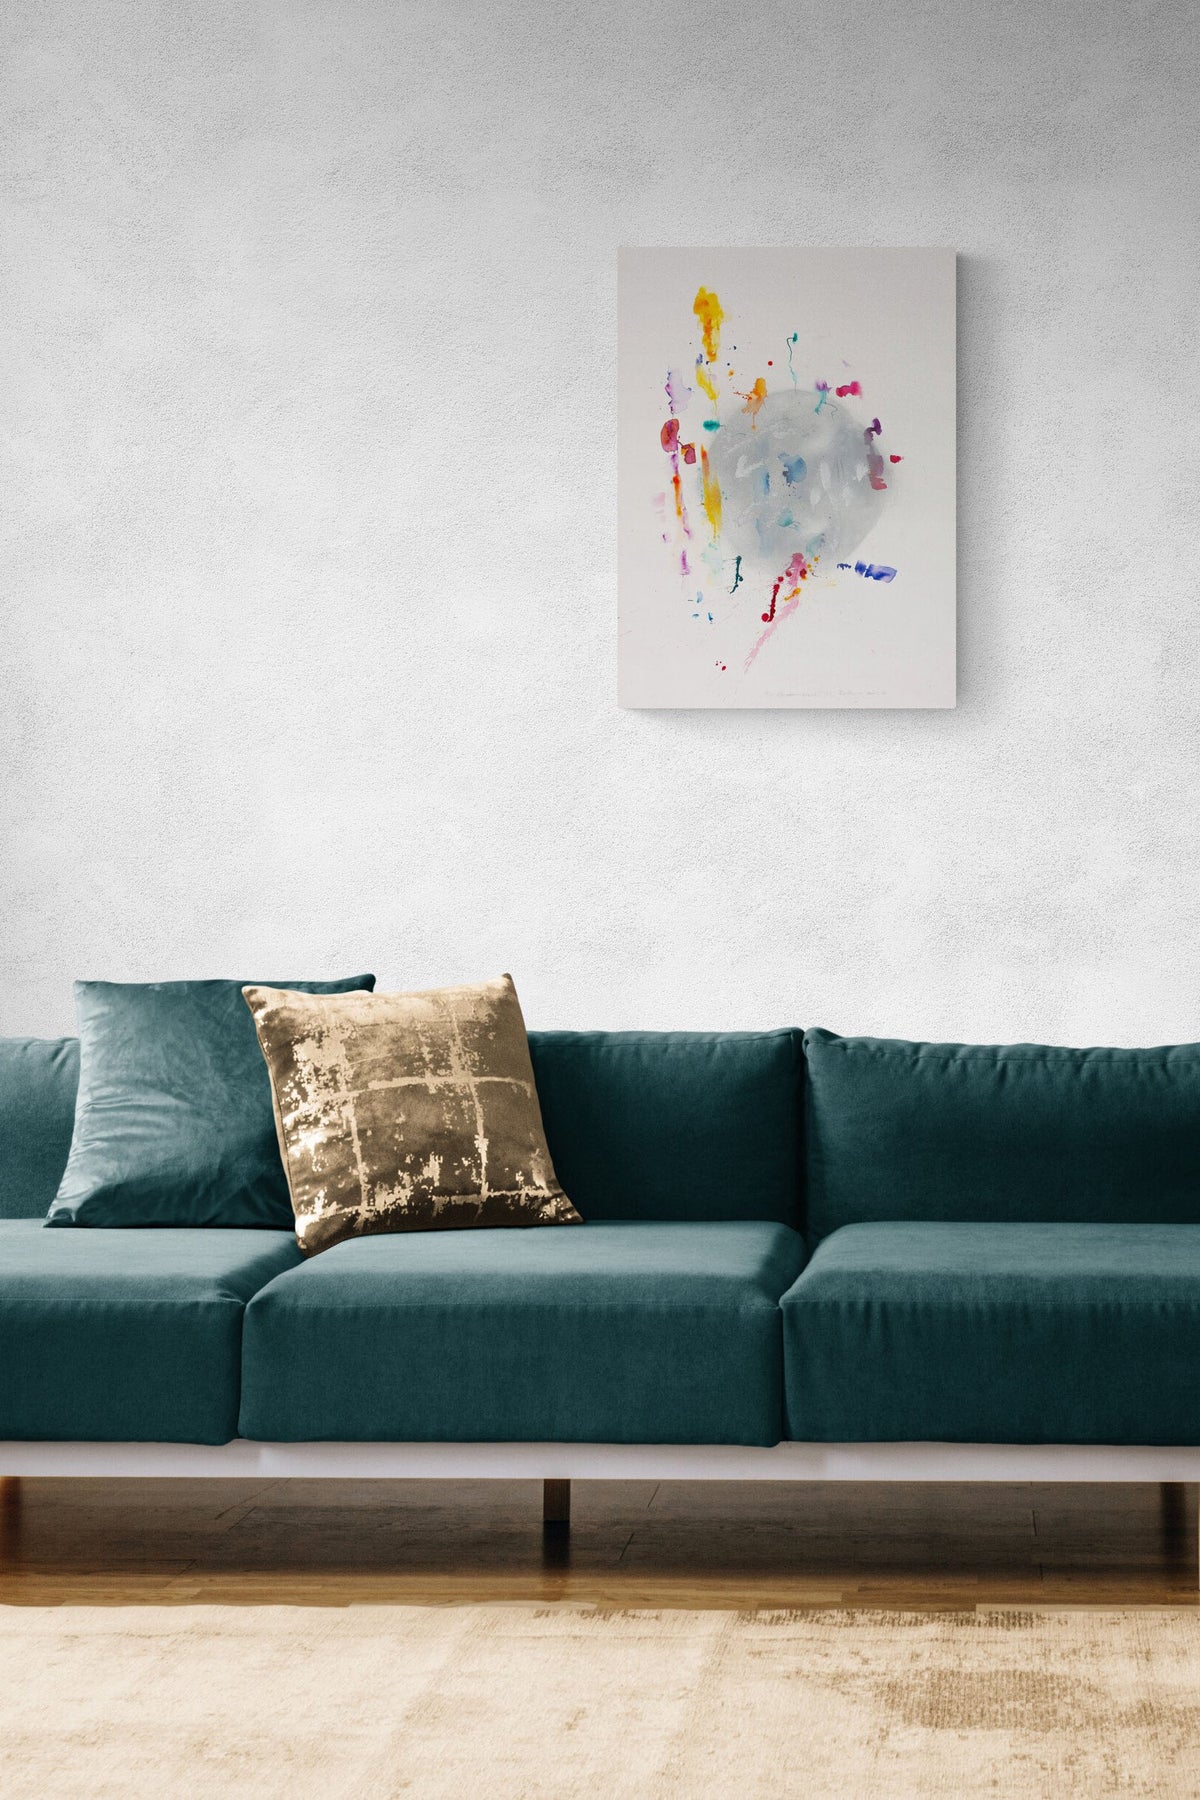 Abstract Expressive Painting adds color & worldly conversation to this simple living room